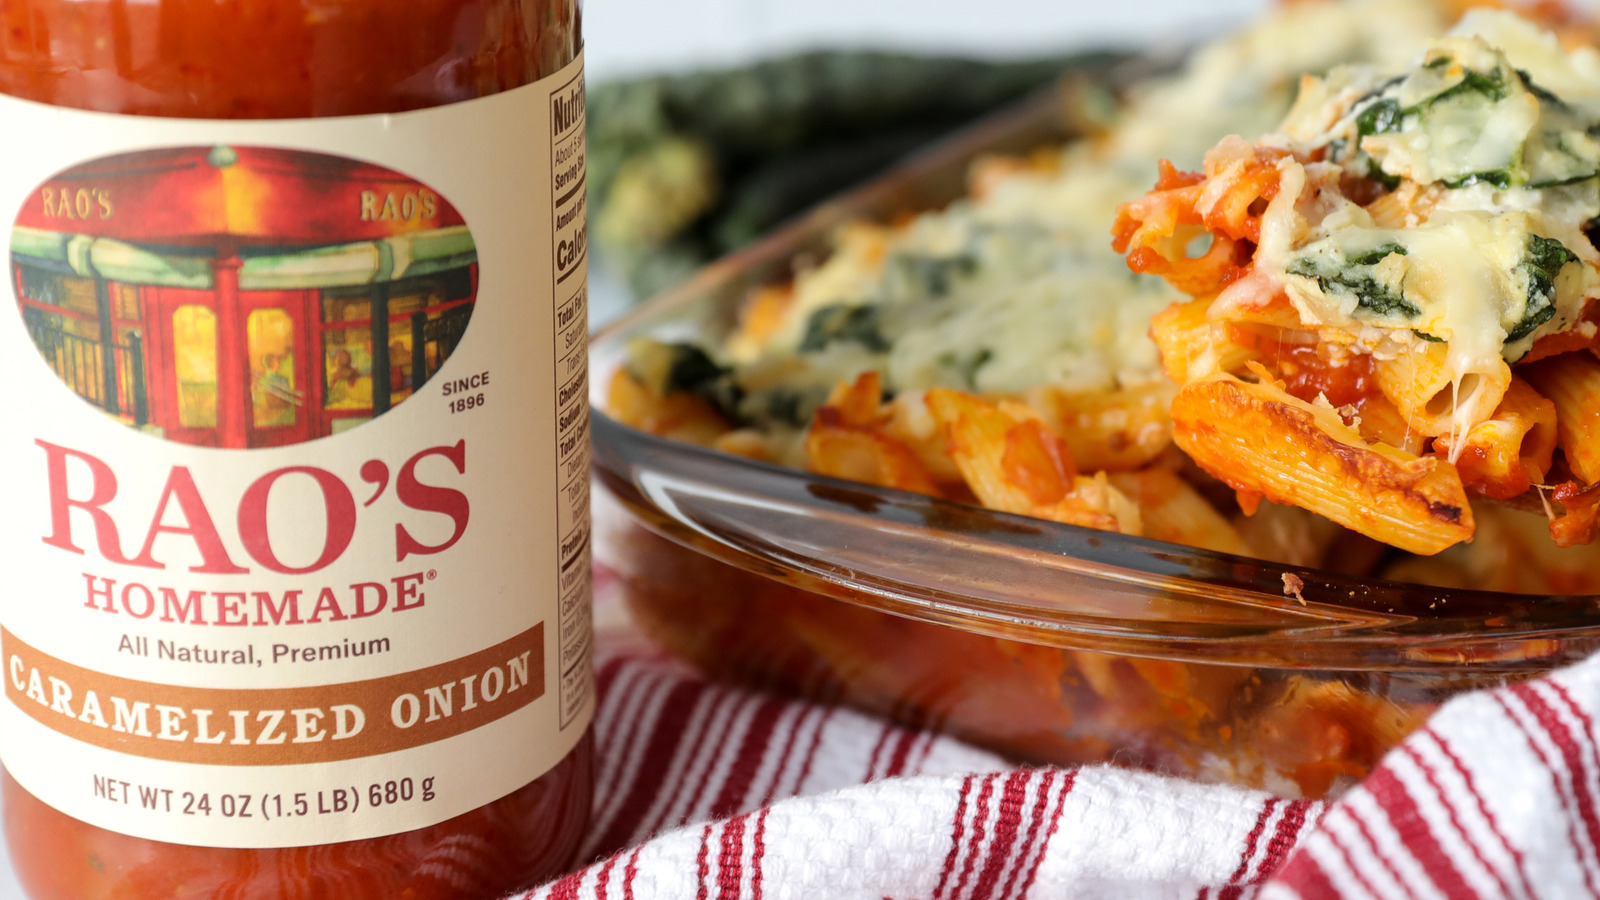 Rao's Homemade Is Debuting A New Line Of Sauces And Soups